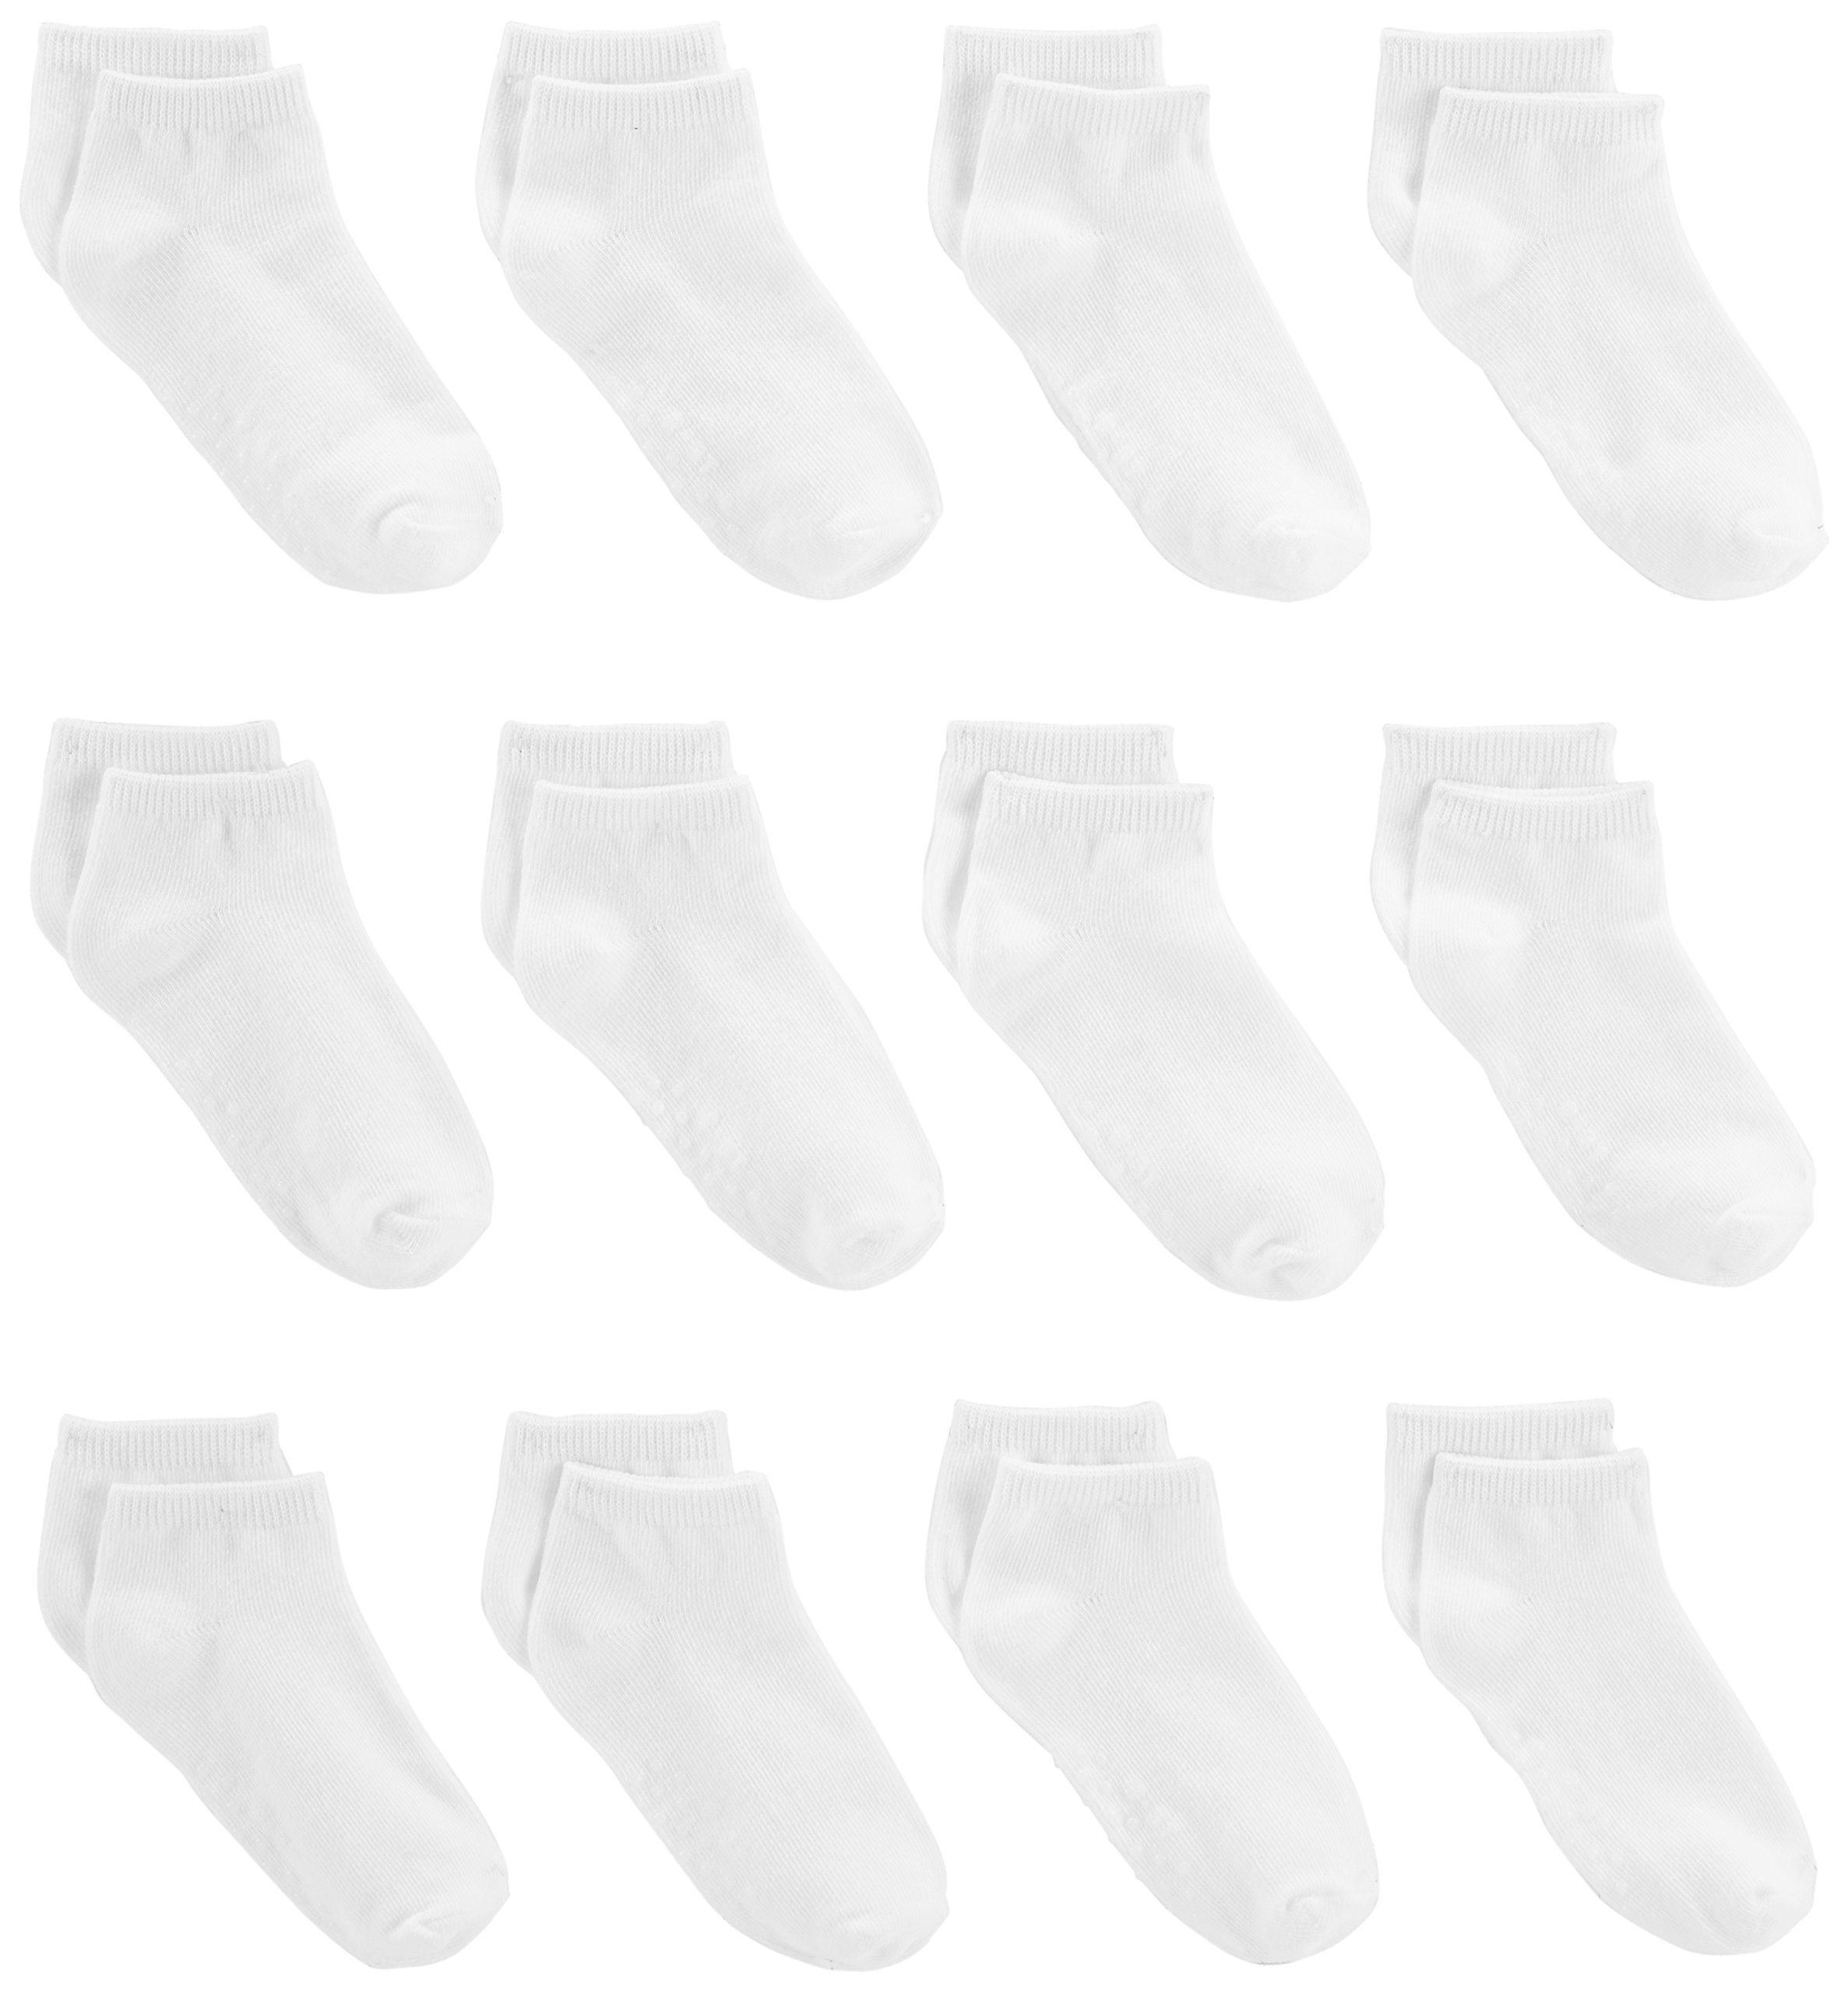 Simple Joys by Carter's Unisex Babies' No-Show Socks, 12 pairs